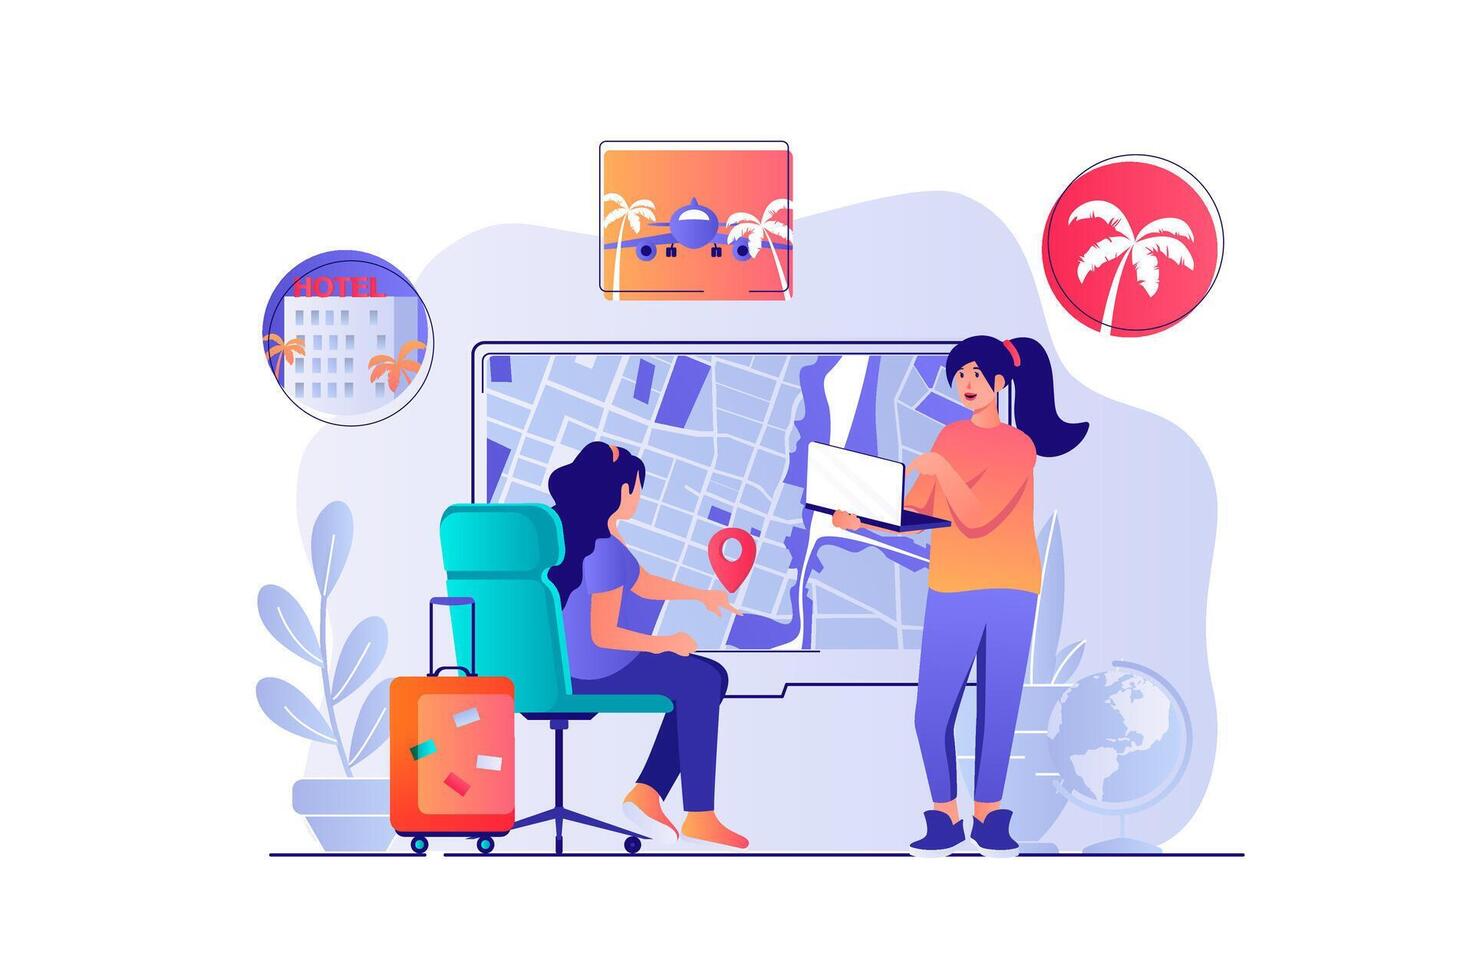 Travel agency concept with people scene. Woman chooses tour, operator helps tourist with traveling, booking hotel room and flight tickets. illustration with characters in flat design for web vector